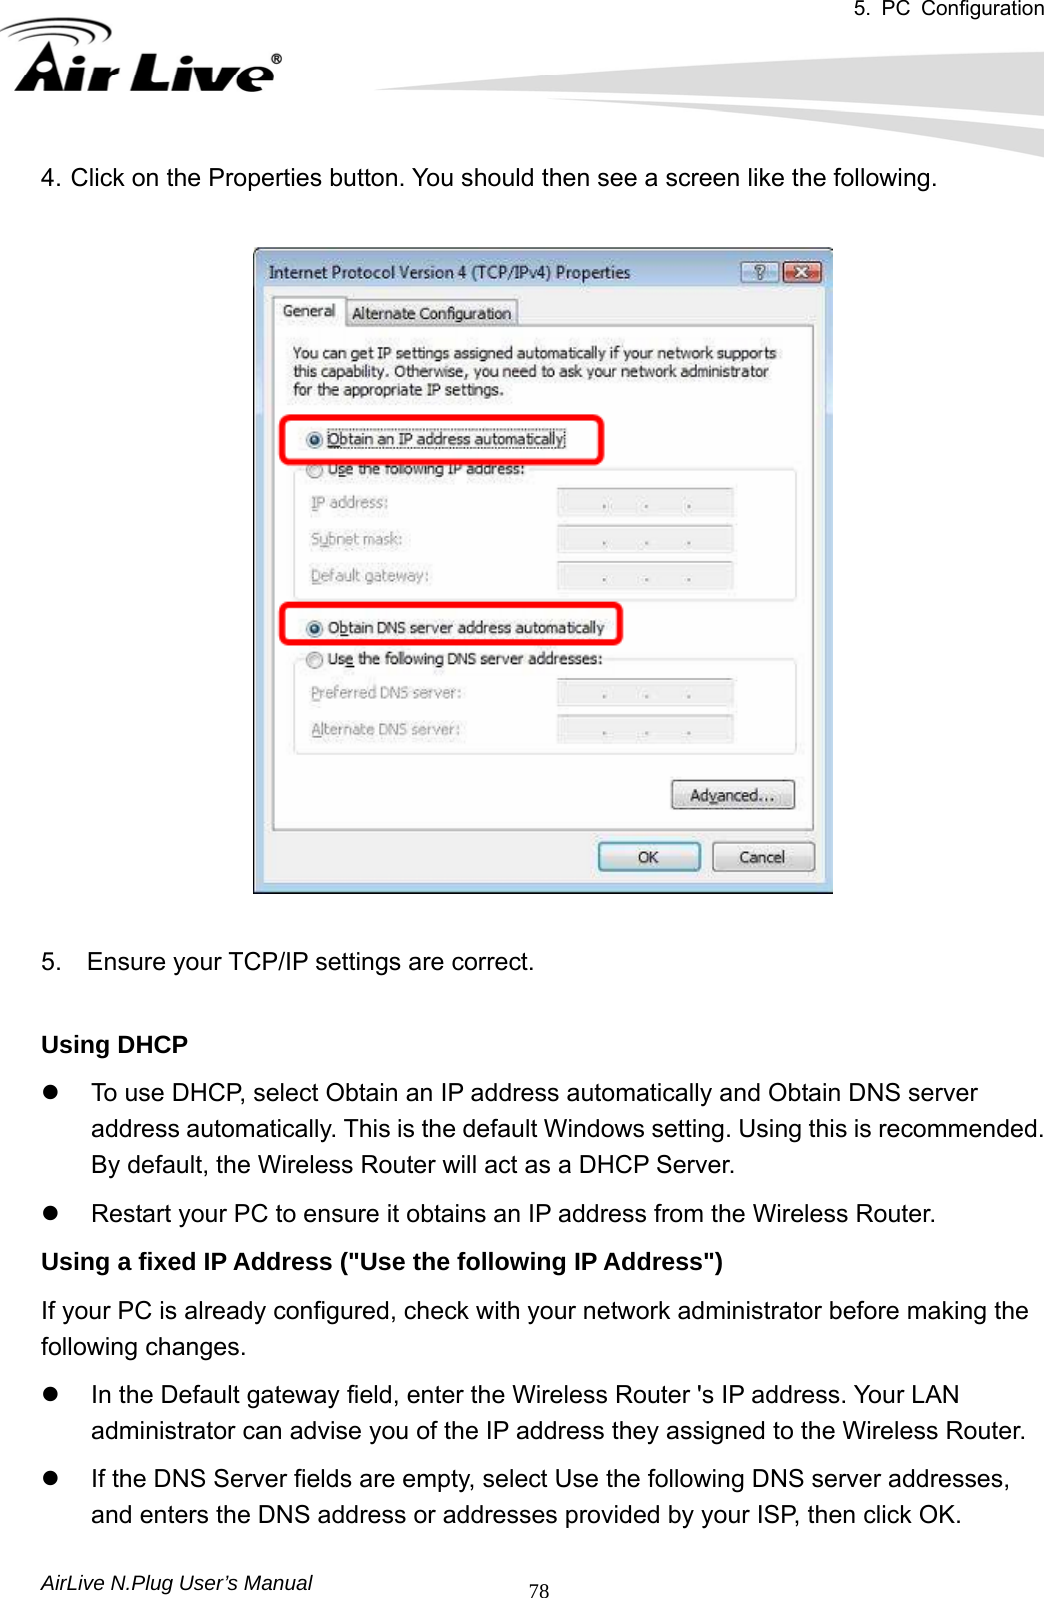 5. PC Configuration       AirLive N.Plug User’s Manual  784. Click on the Properties button. You should then see a screen like the following.       5.    Ensure your TCP/IP settings are correct.    Using DHCP   z  To use DHCP, select Obtain an IP address automatically and Obtain DNS server address automatically. This is the default Windows setting. Using this is recommended. By default, the Wireless Router will act as a DHCP Server.   z  Restart your PC to ensure it obtains an IP address from the Wireless Router. Using a fixed IP Address (&quot;Use the following IP Address&quot;)   If your PC is already configured, check with your network administrator before making the following changes. z  In the Default gateway field, enter the Wireless Router &apos;s IP address. Your LAN administrator can advise you of the IP address they assigned to the Wireless Router.   z  If the DNS Server fields are empty, select Use the following DNS server addresses, and enters the DNS address or addresses provided by your ISP, then click OK. 